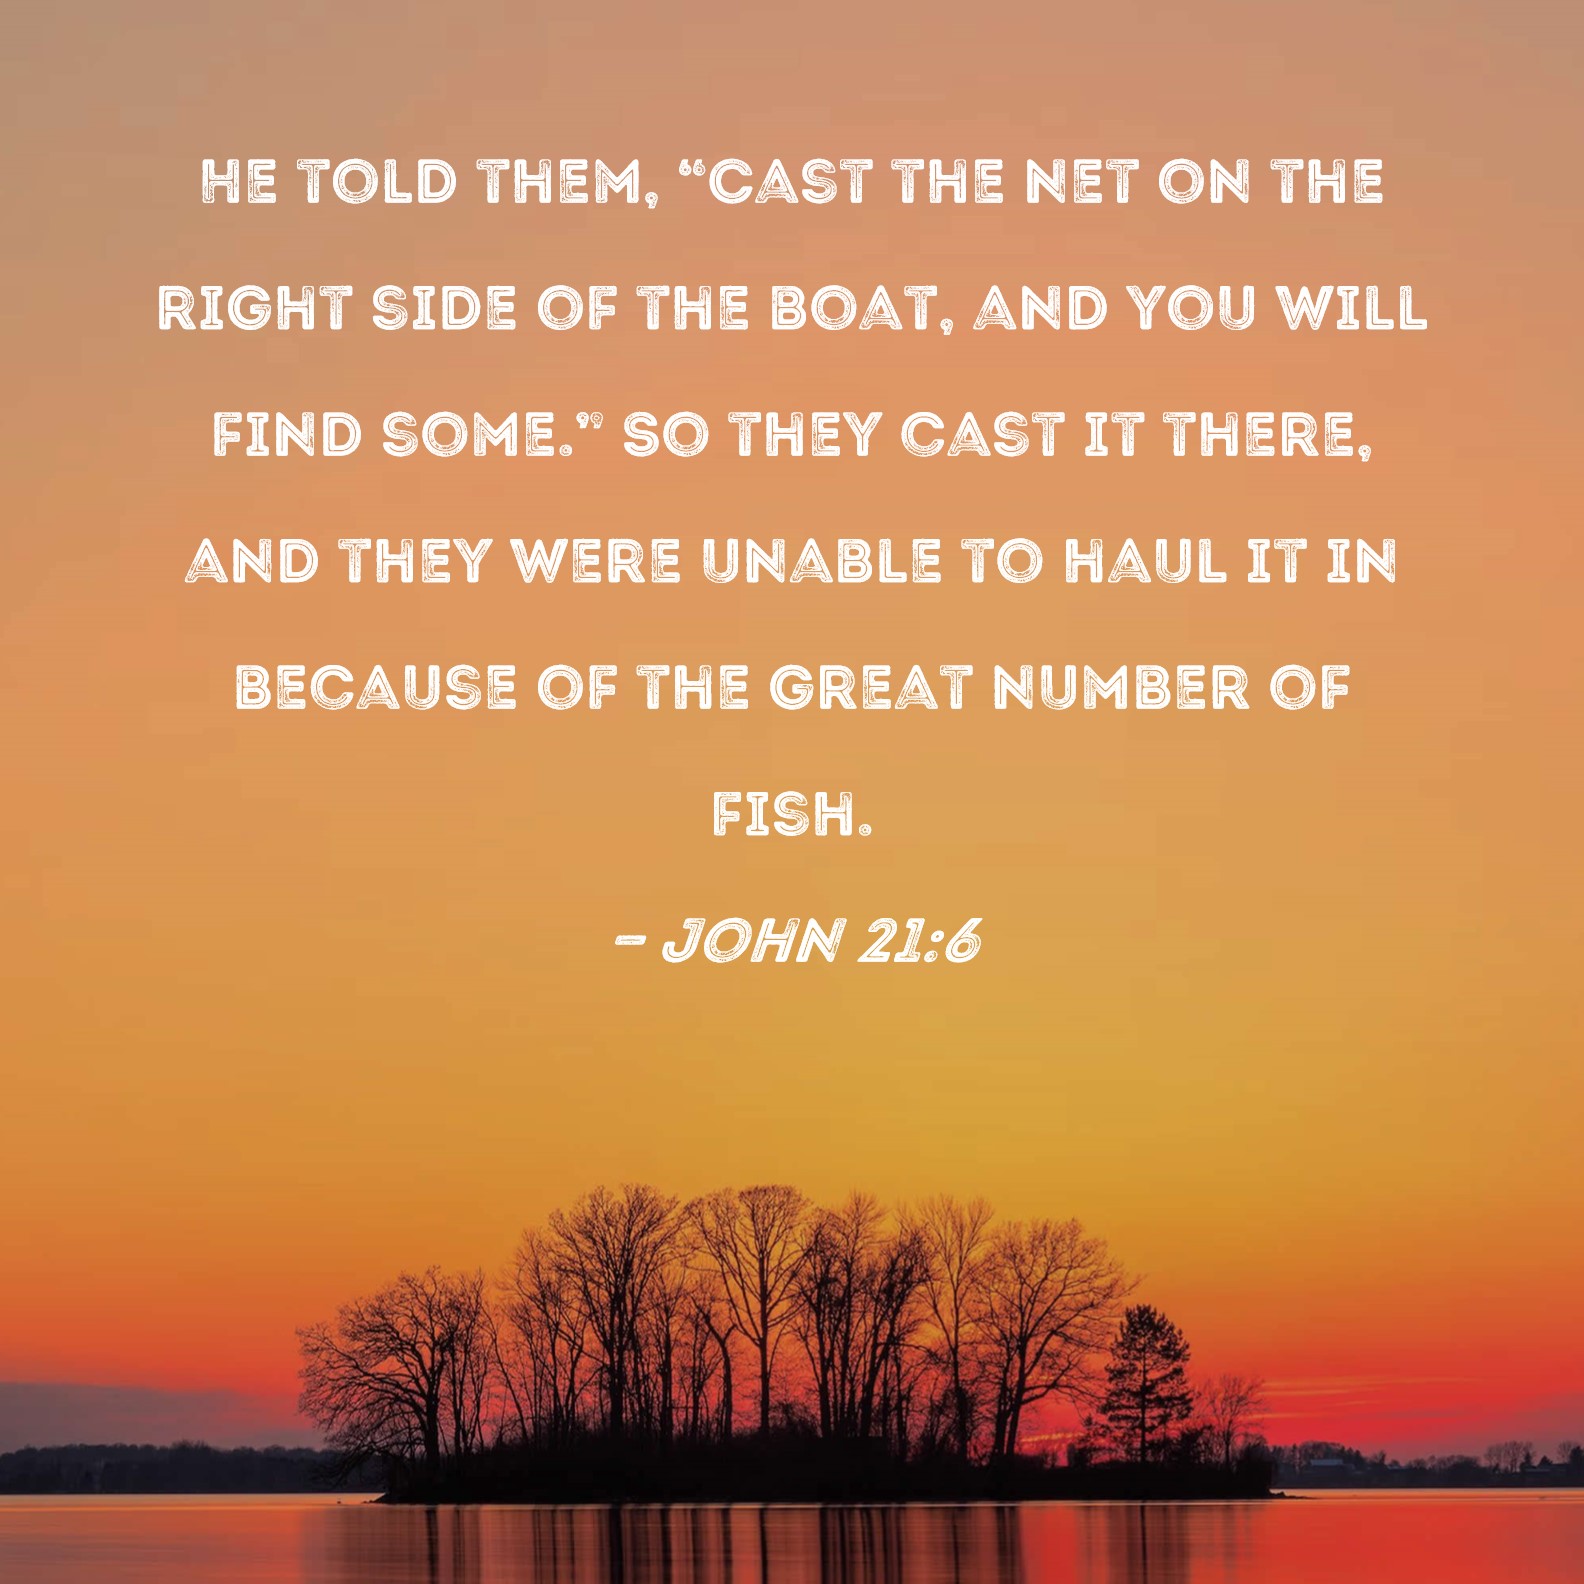 John 21:6 He told them, Cast the net on the right side of the boat, and  you will find some. So they cast it there, and they were unable to haul it